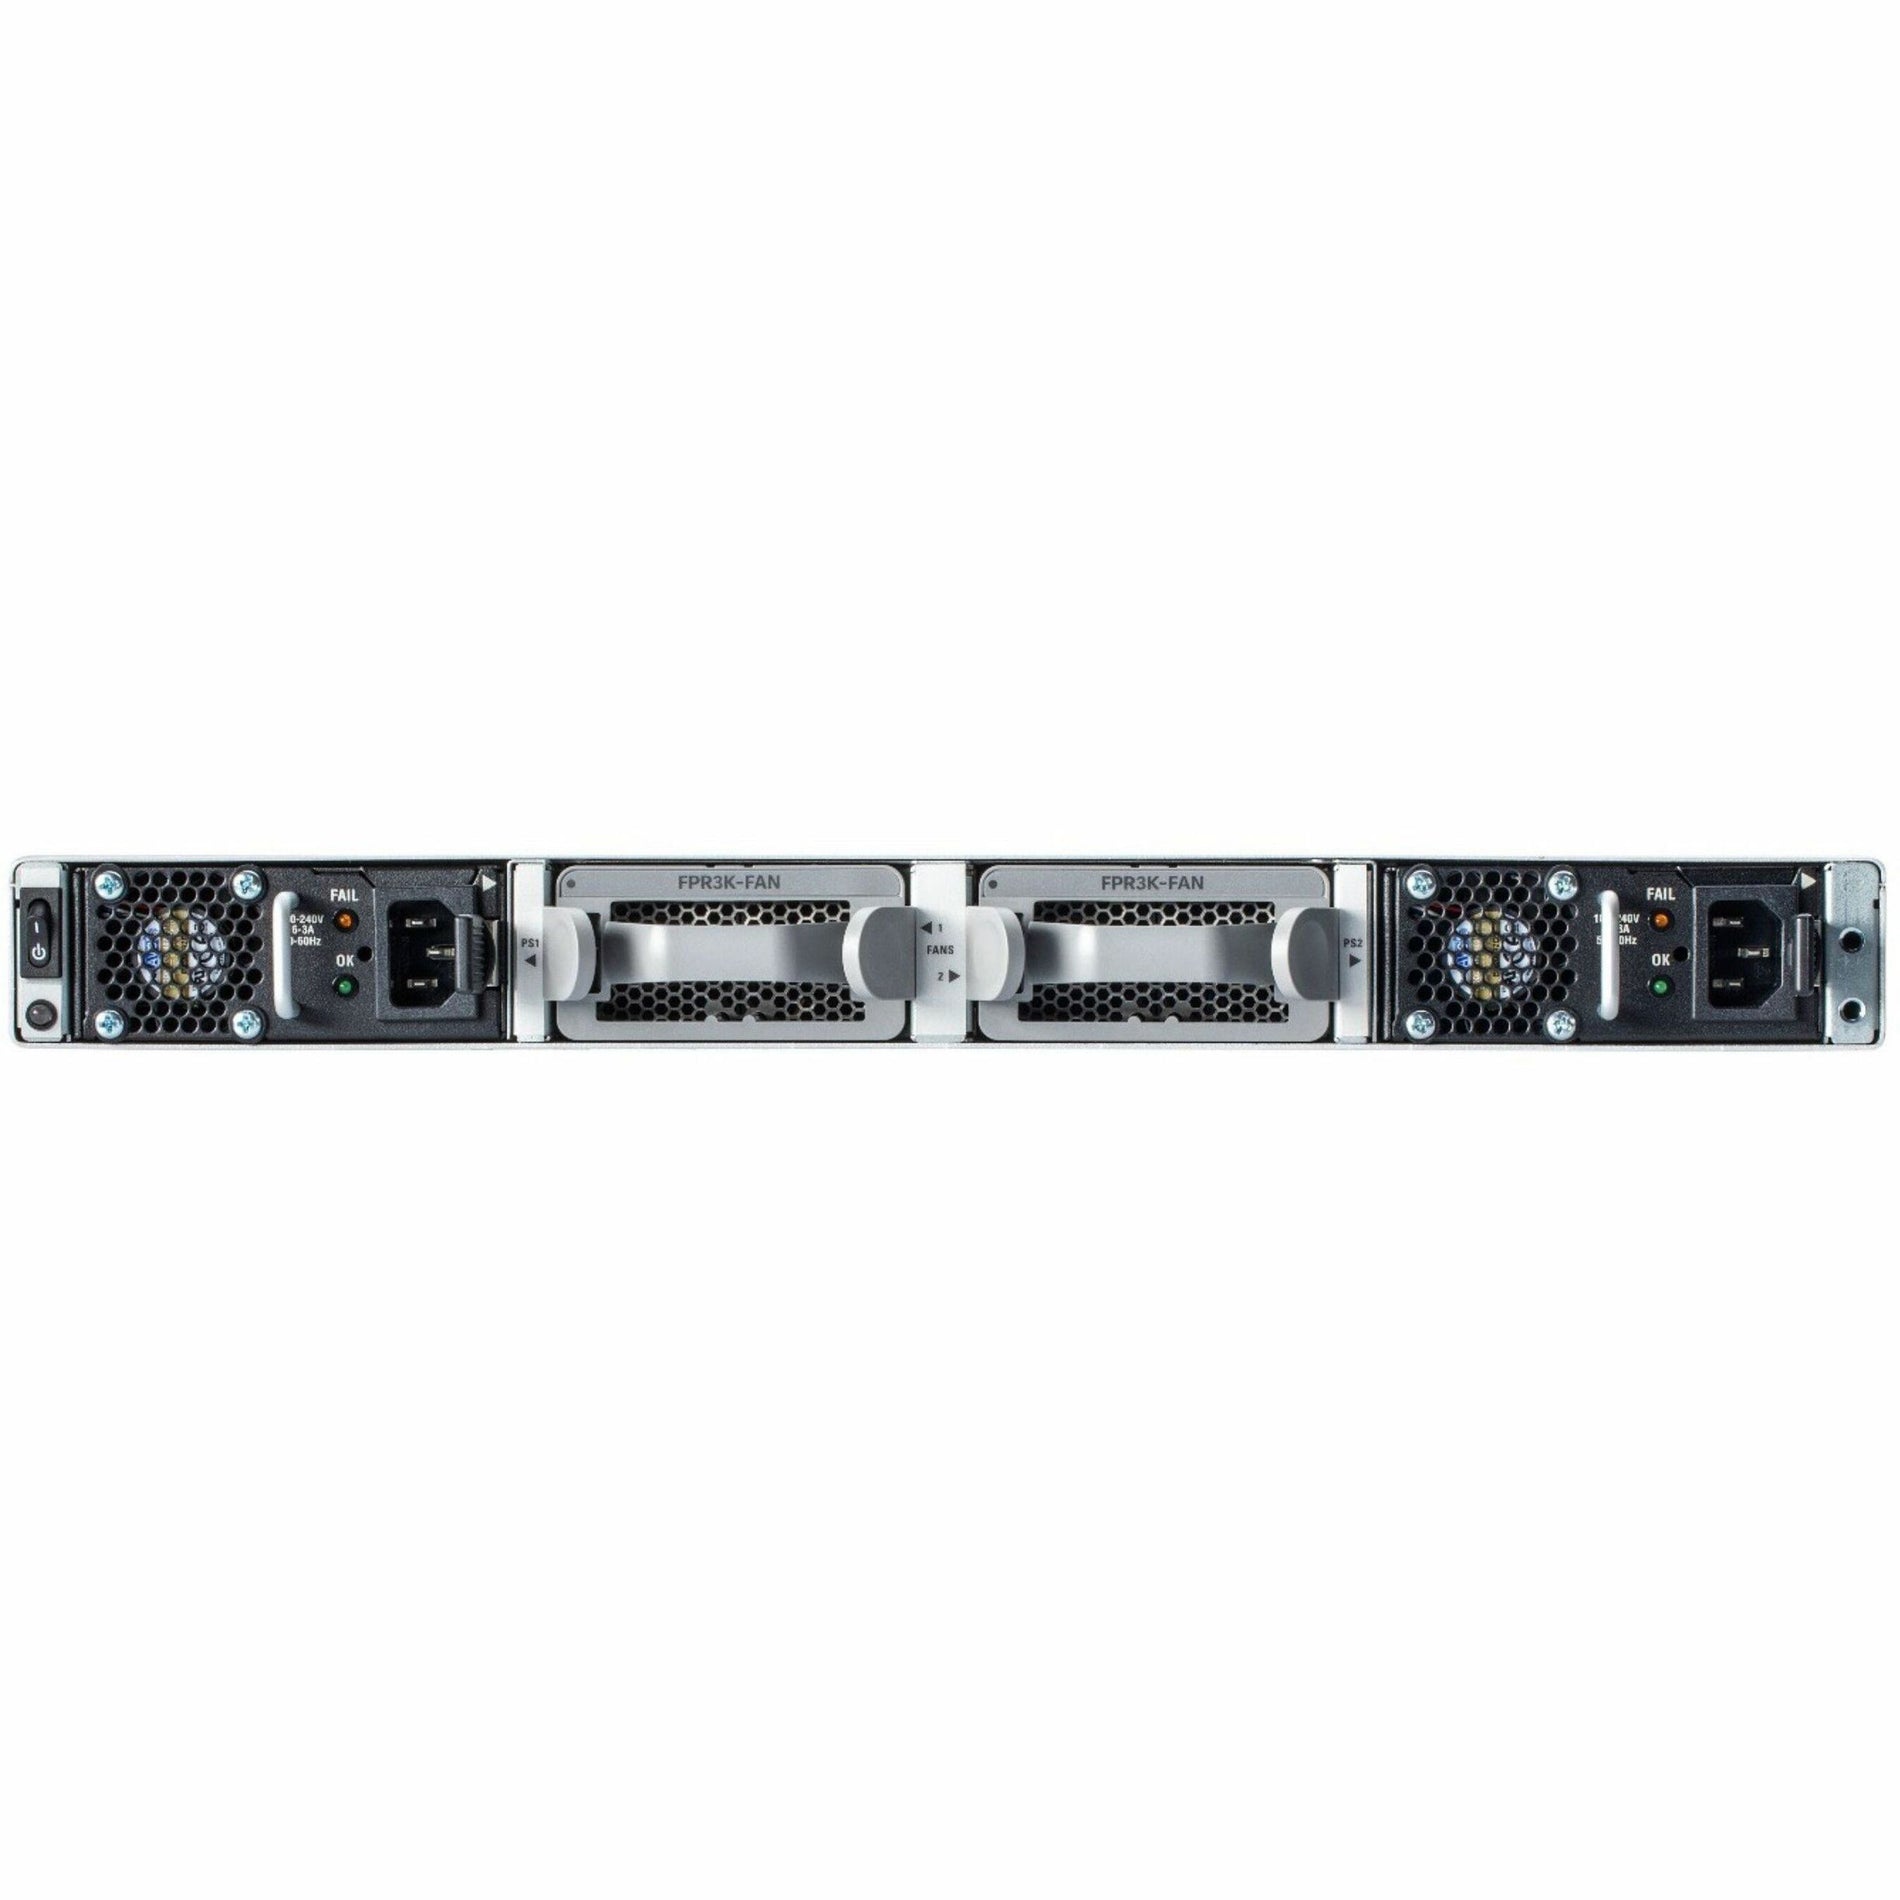 Cisco 3105 Network Security/Firewall Appliance (FPR3105-NGFW-K9)